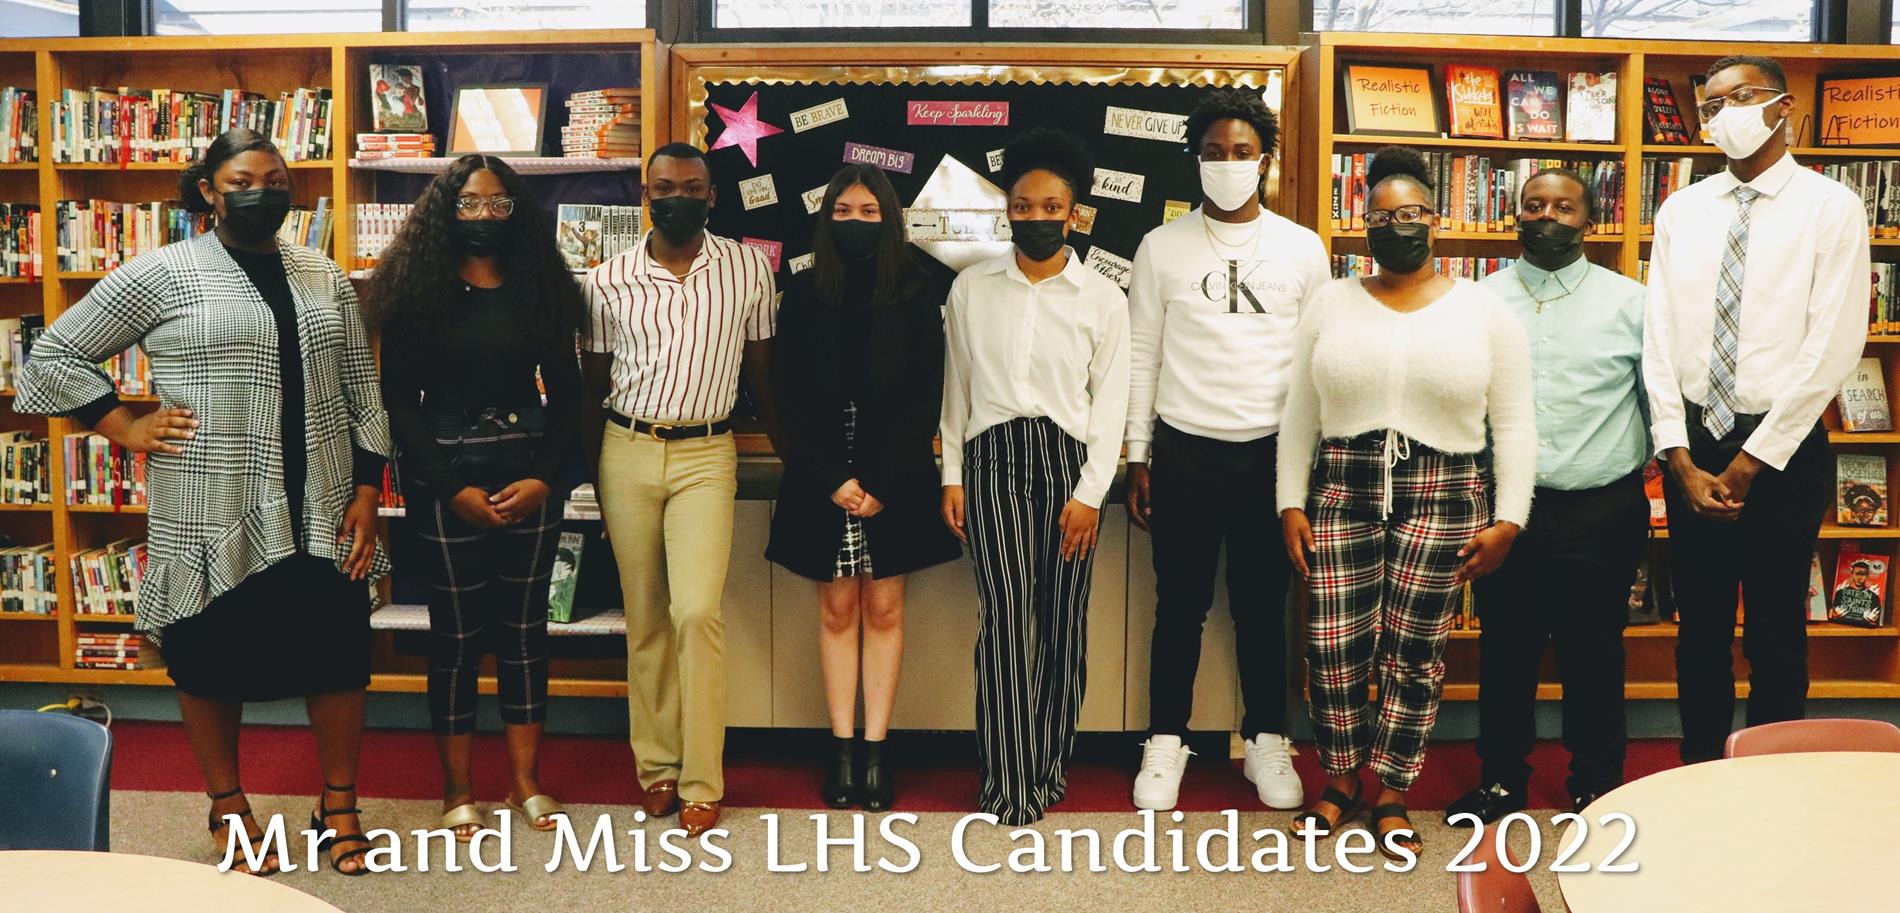 Mr and Miss LHS Candidates 2022